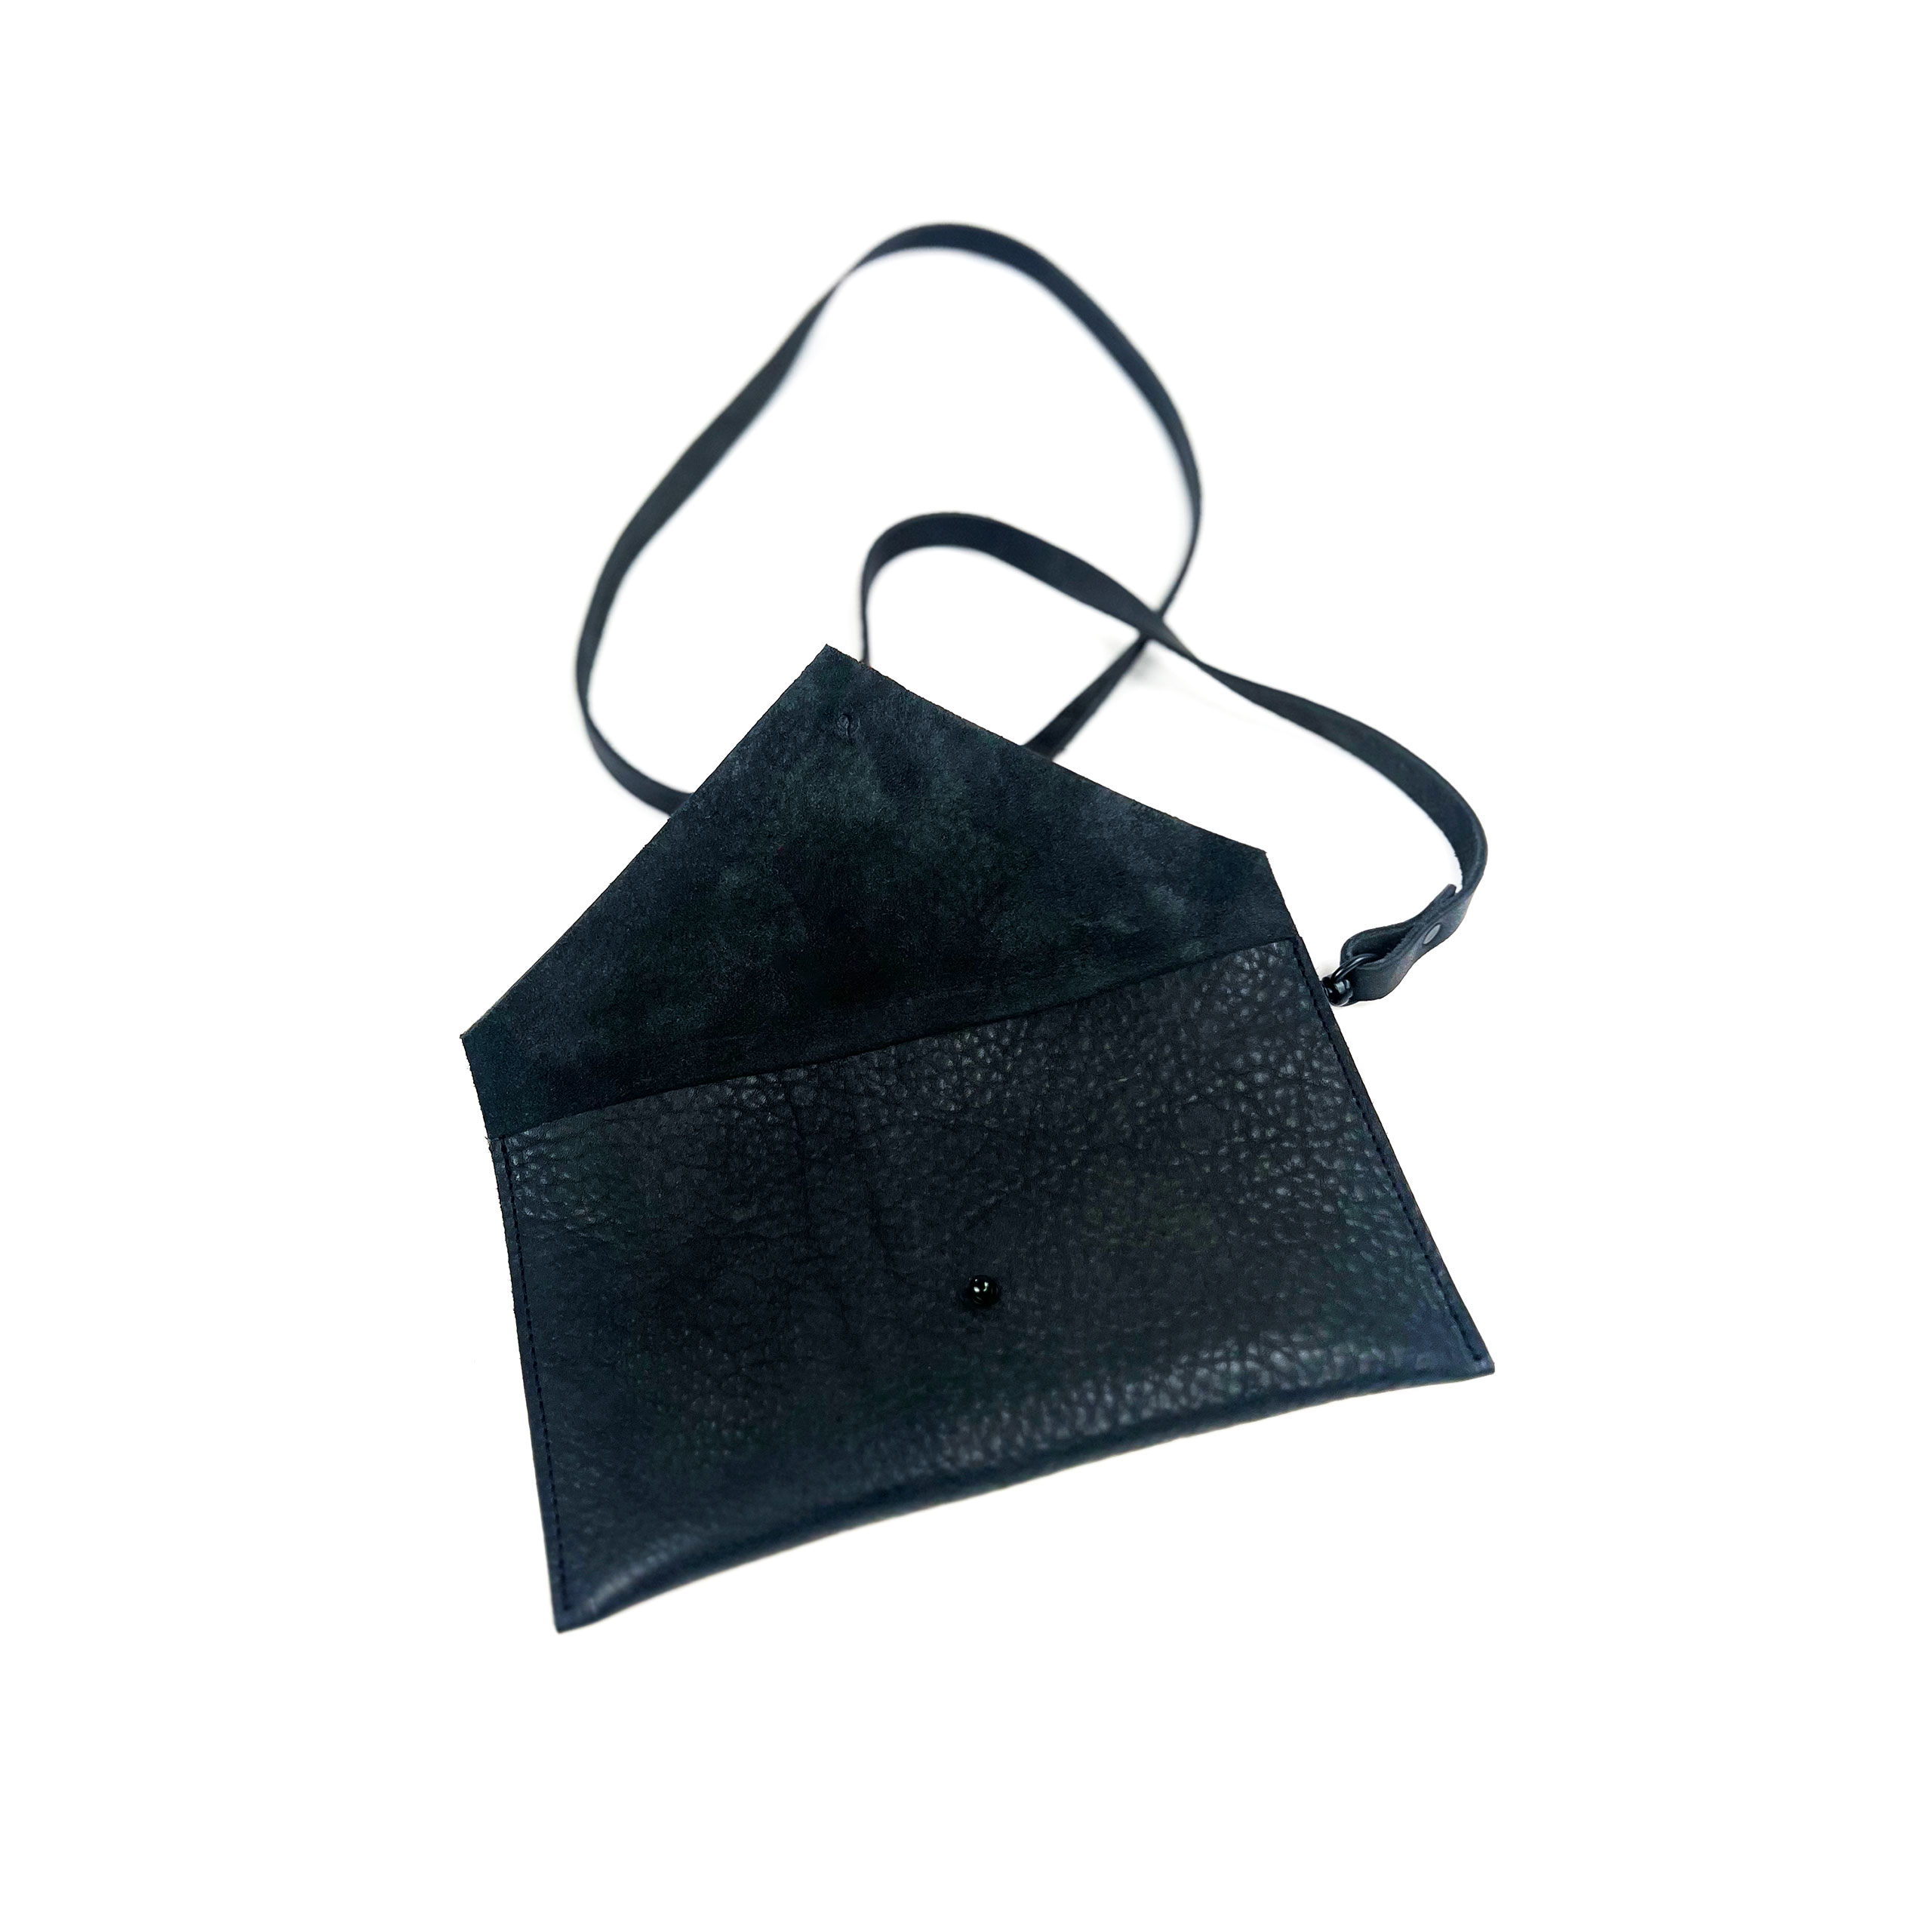 A black leather shoulder bag with open front flap, isolated on a white background.